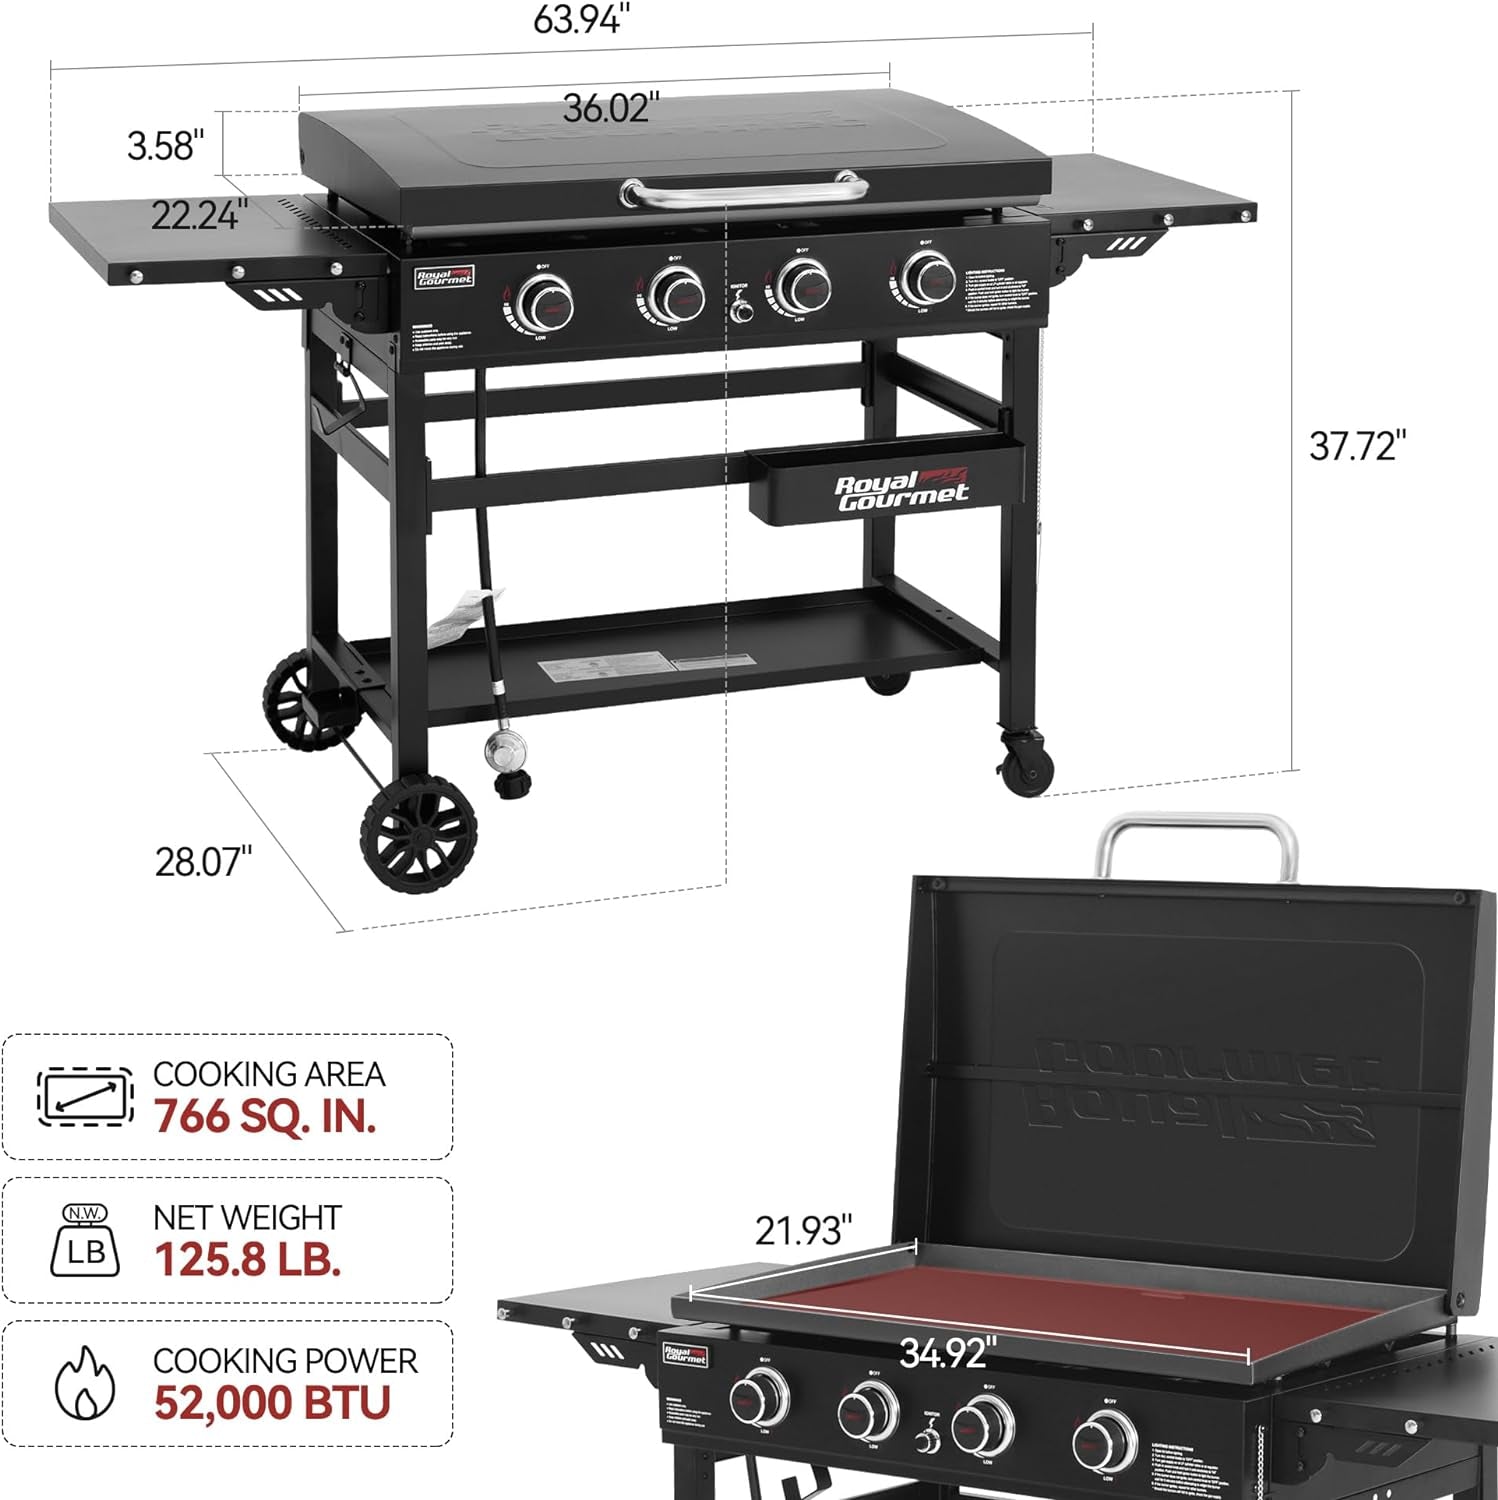 GB4000P 4-Burner Propane Gas Griddle with Hard Cover, 35-Inch Flat Top BBQ Grill, 52,000 BTU, Outdoor Griddle Cooking Station for Backyard and Tailgating, Black